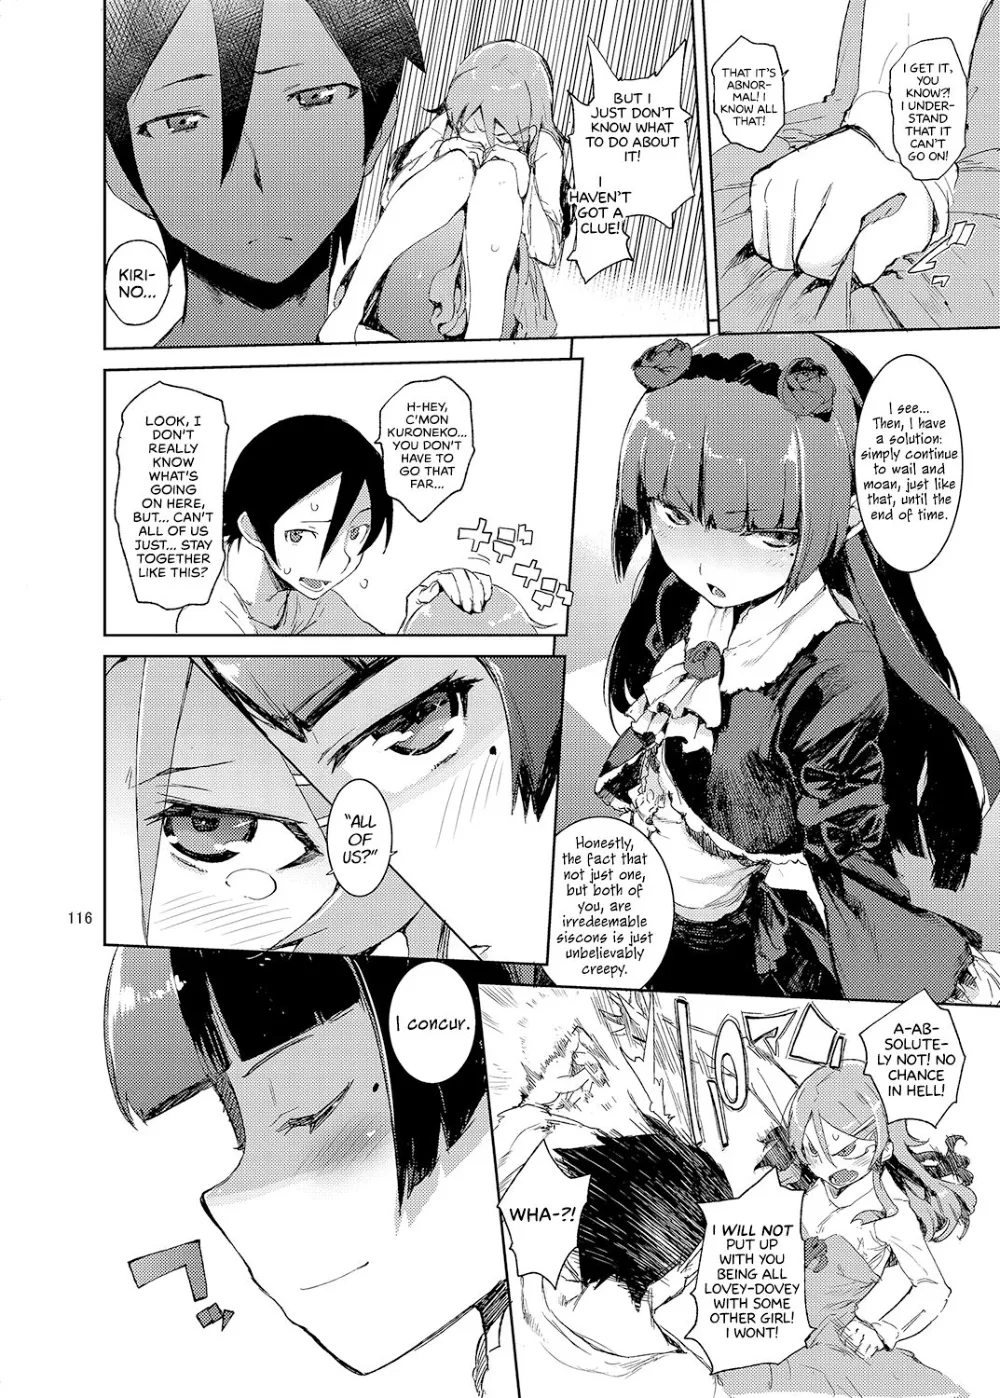 Solute Party Porn - O, Ore no Imouto gaa Soushuuhen Kai | M- My Little Sister... She's...  Revised Series Compilation(Page 1) - Hentai Manga